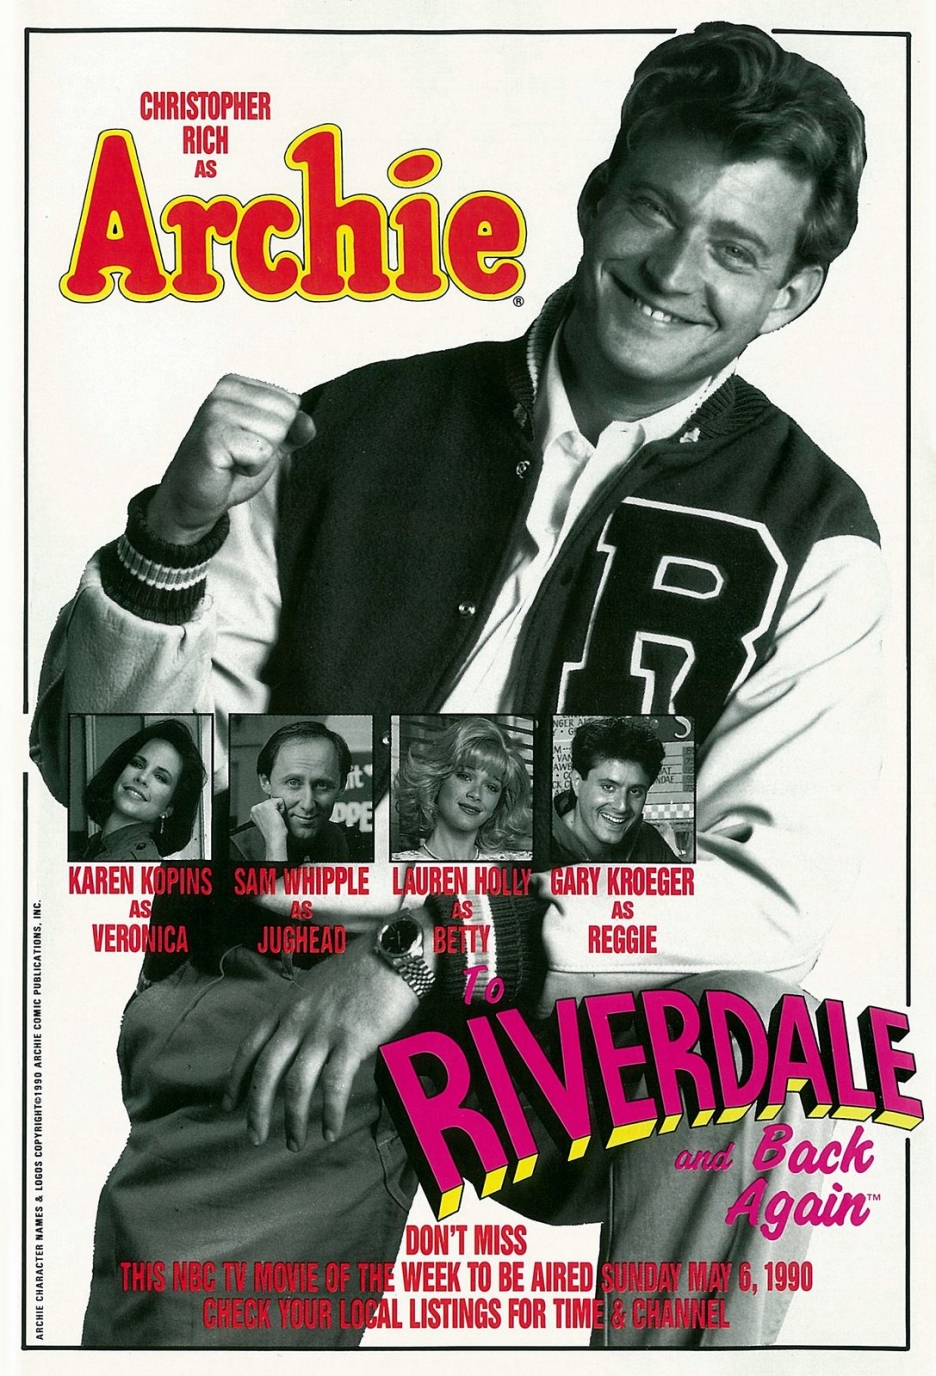 Archie: To Riverdale and Back Again (1990) starring Christopher Rich on DVD on DVD